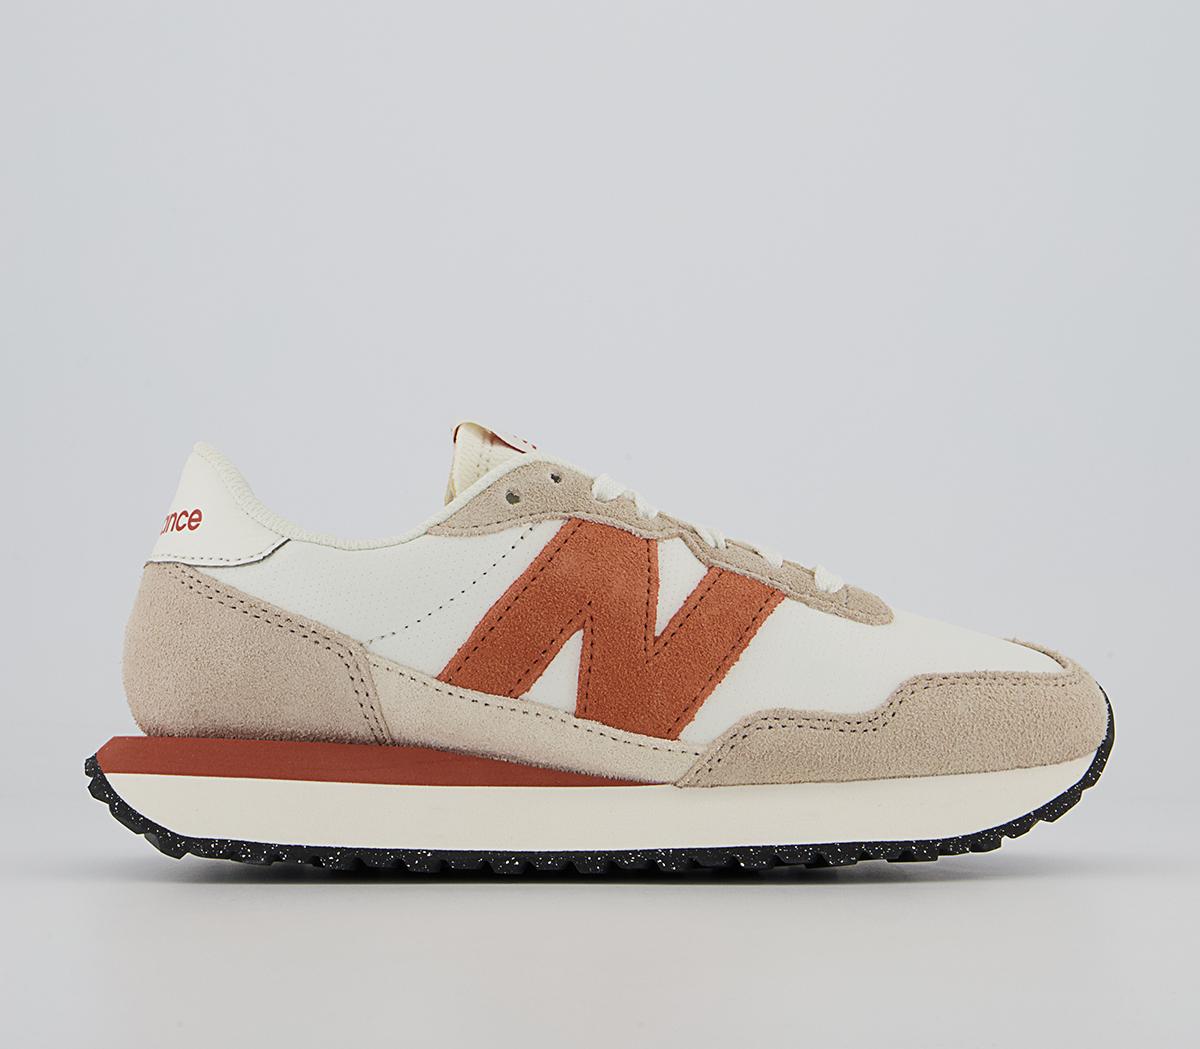 New Balance Ms237 Trainers Taupe Tan White Black - Unisex Sports